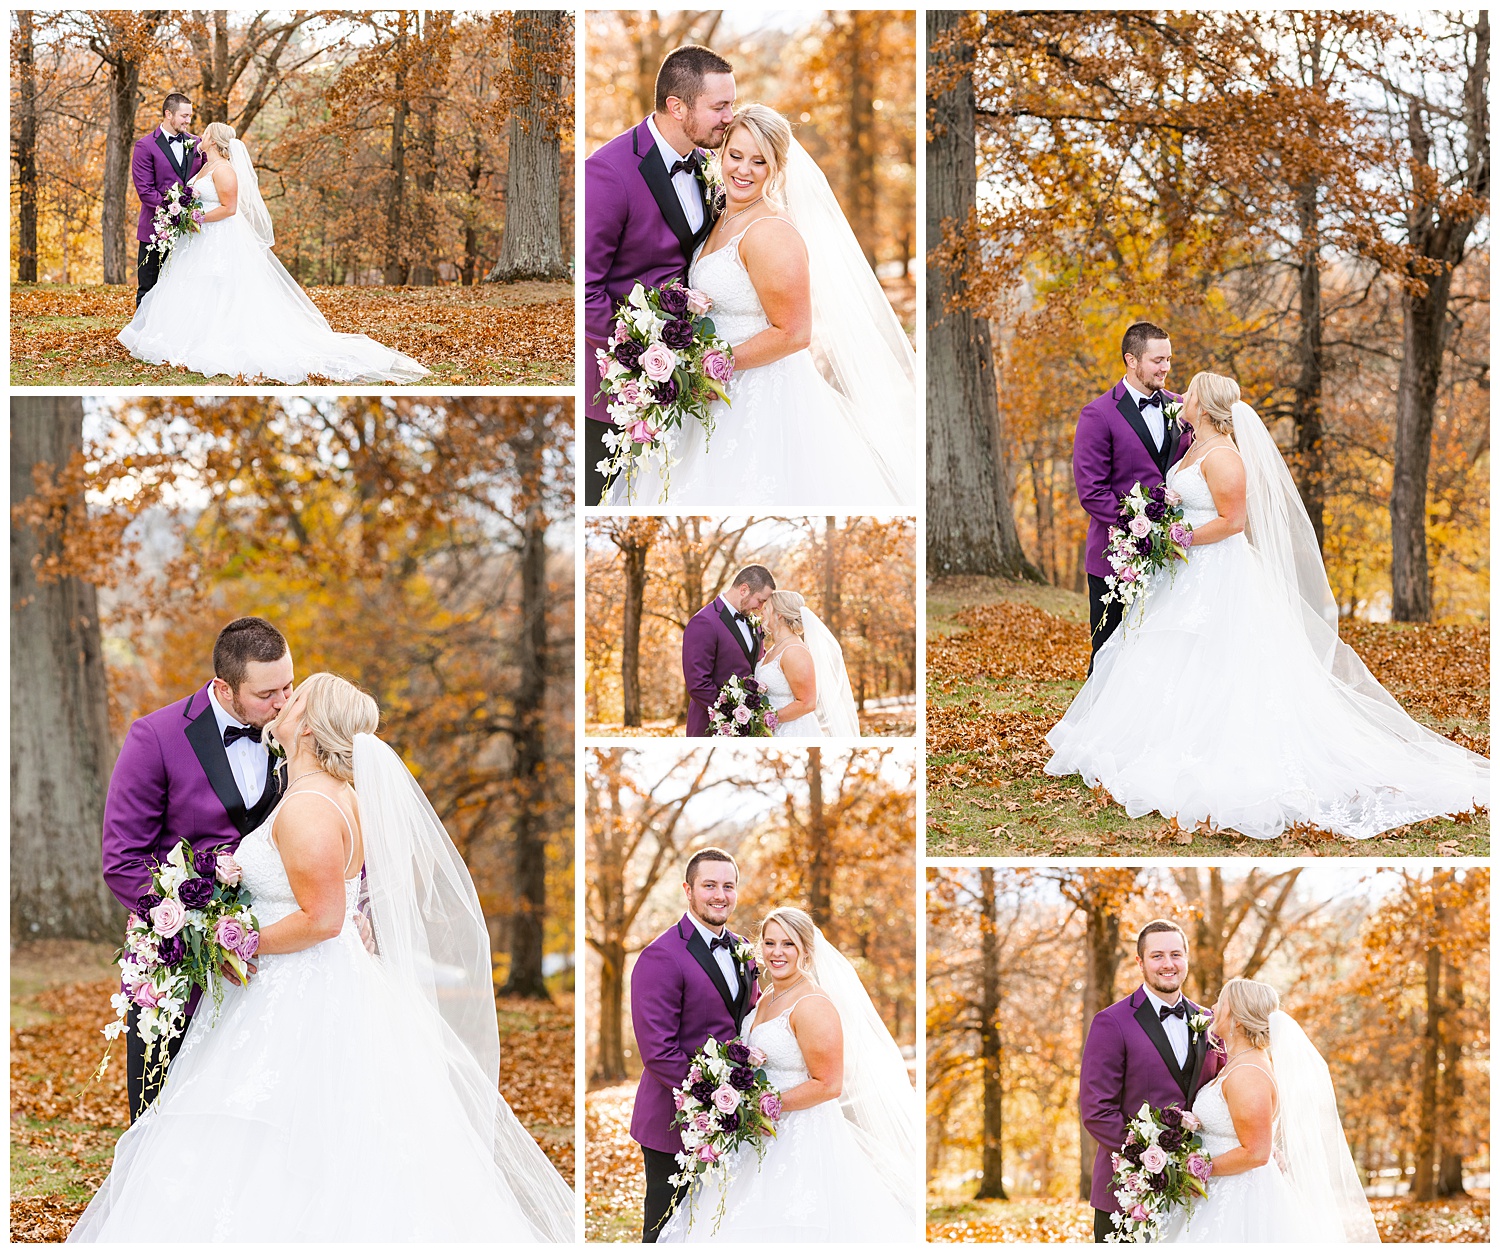 Groom in purple tux jacket poses with wife in fall foliage